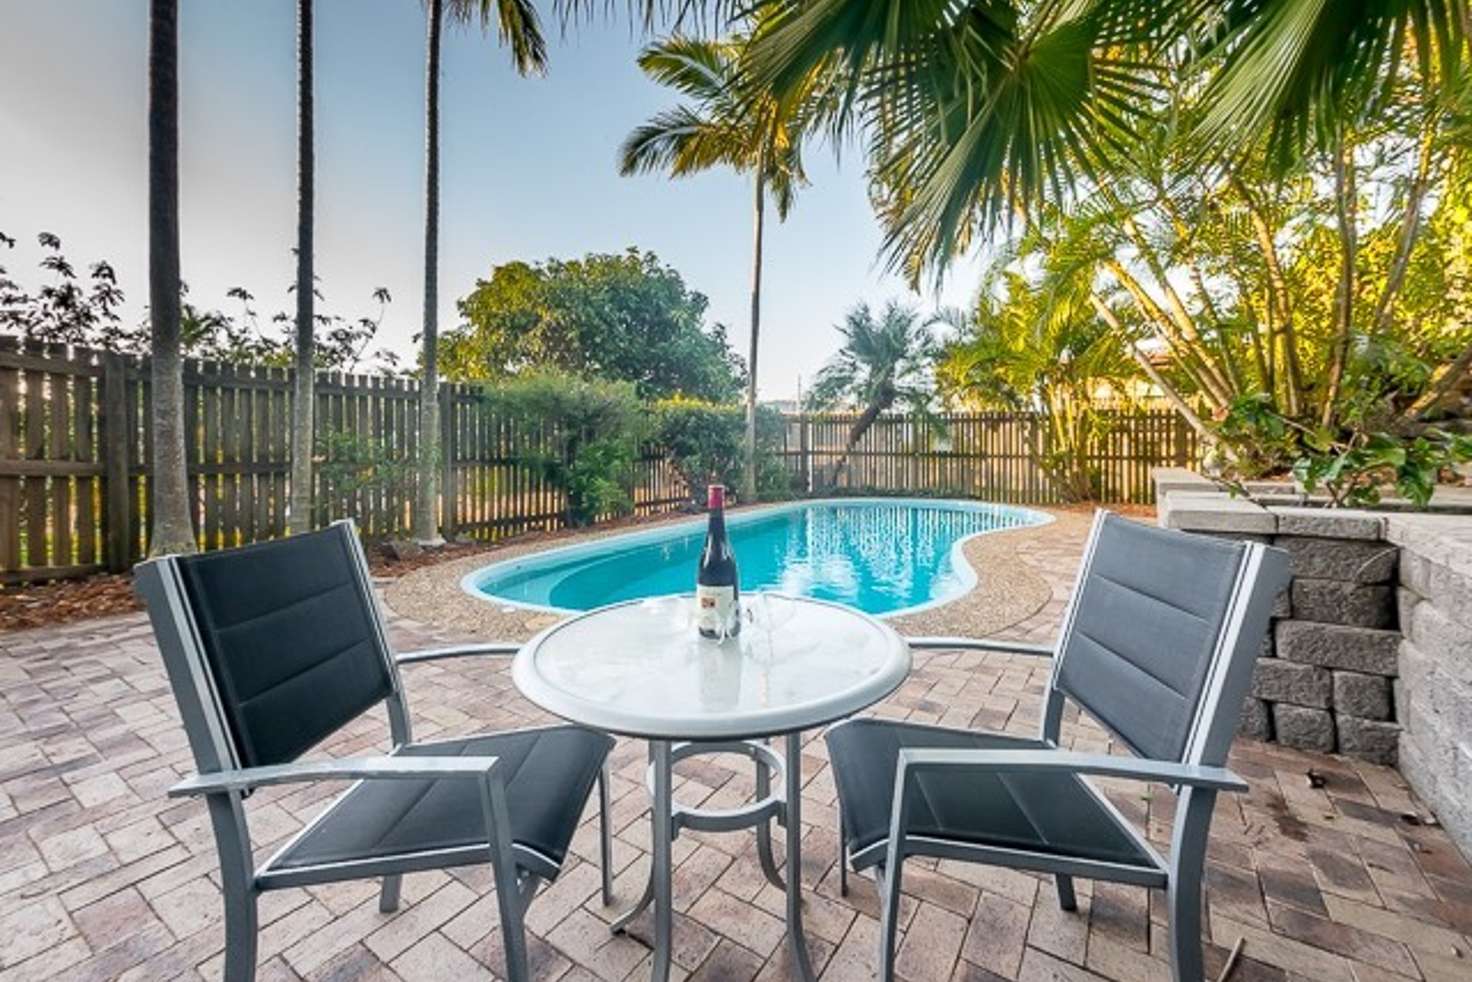 Main view of Homely house listing, 4 Creese Street, Beaconsfield QLD 4740